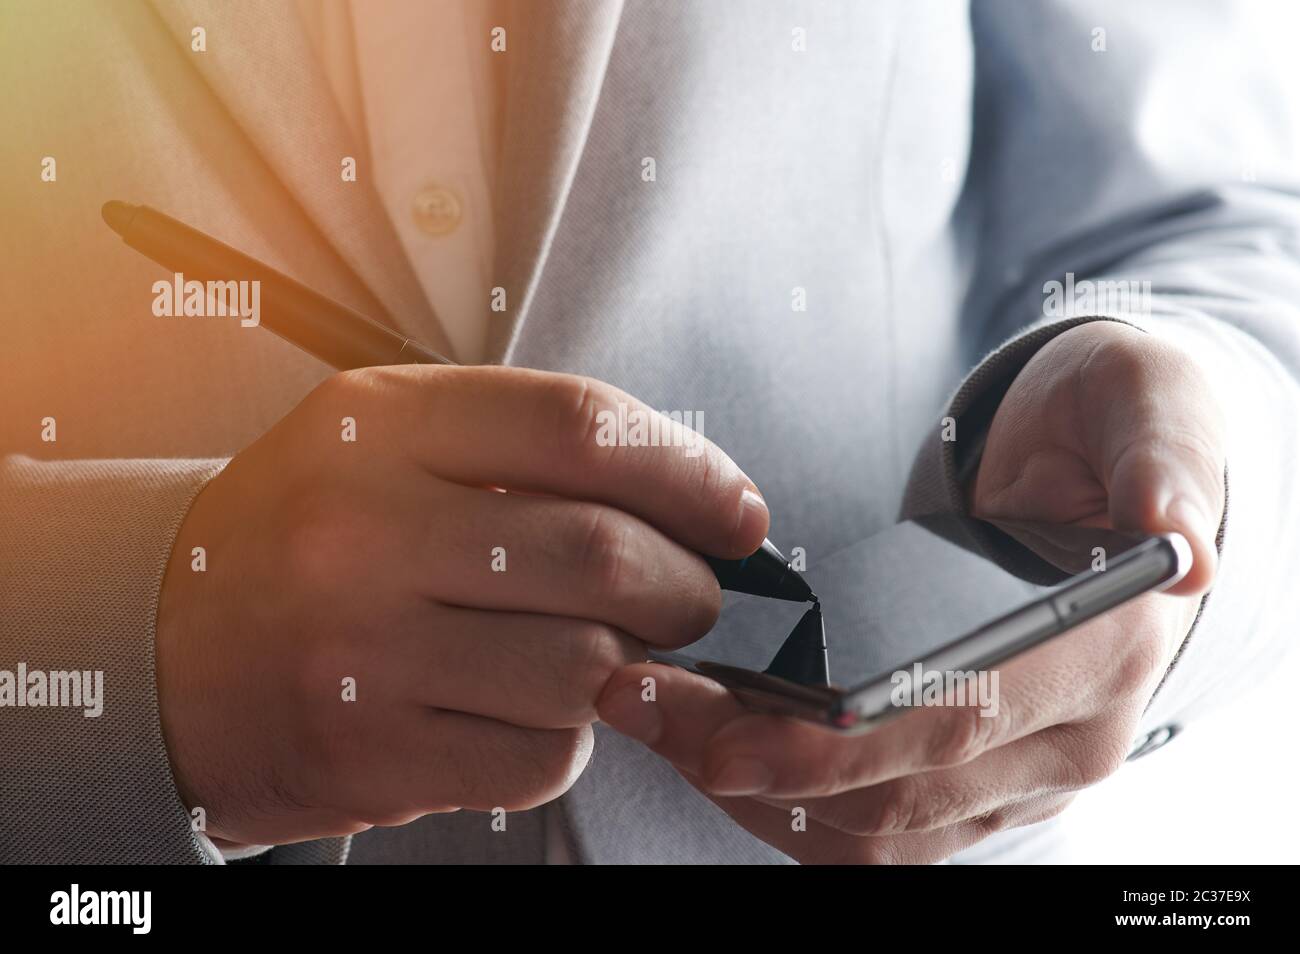 Man signing document on smartphone in business man background Stock Photo